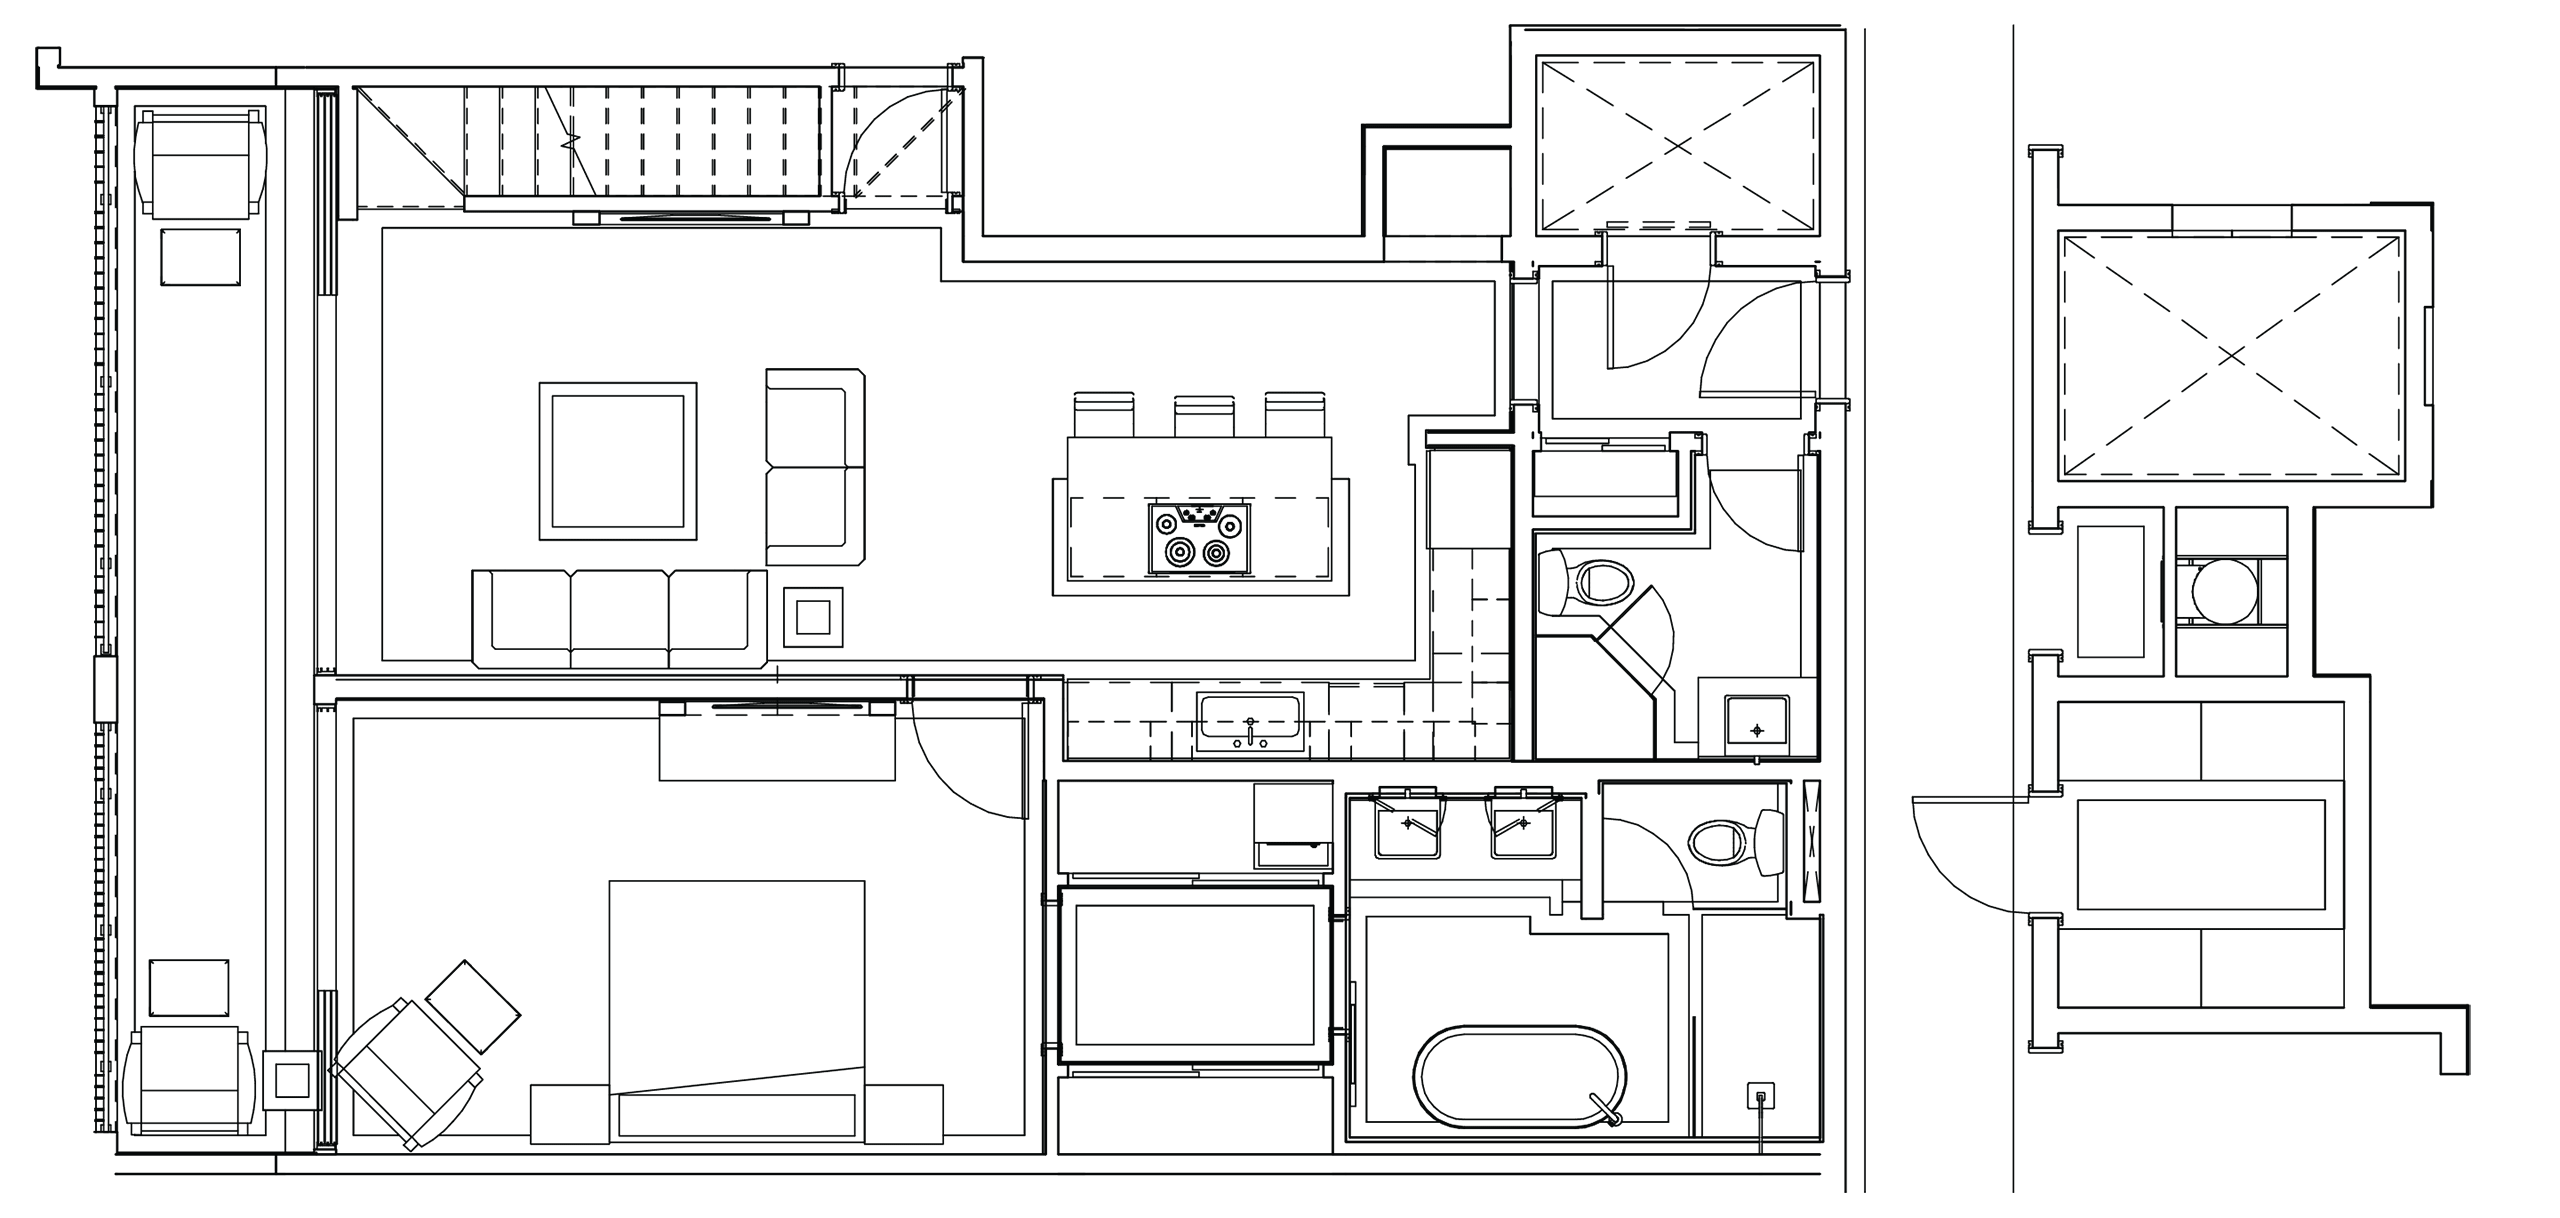 1 Bedroom Deluxe Penthouse with Roof Deck Phase 3